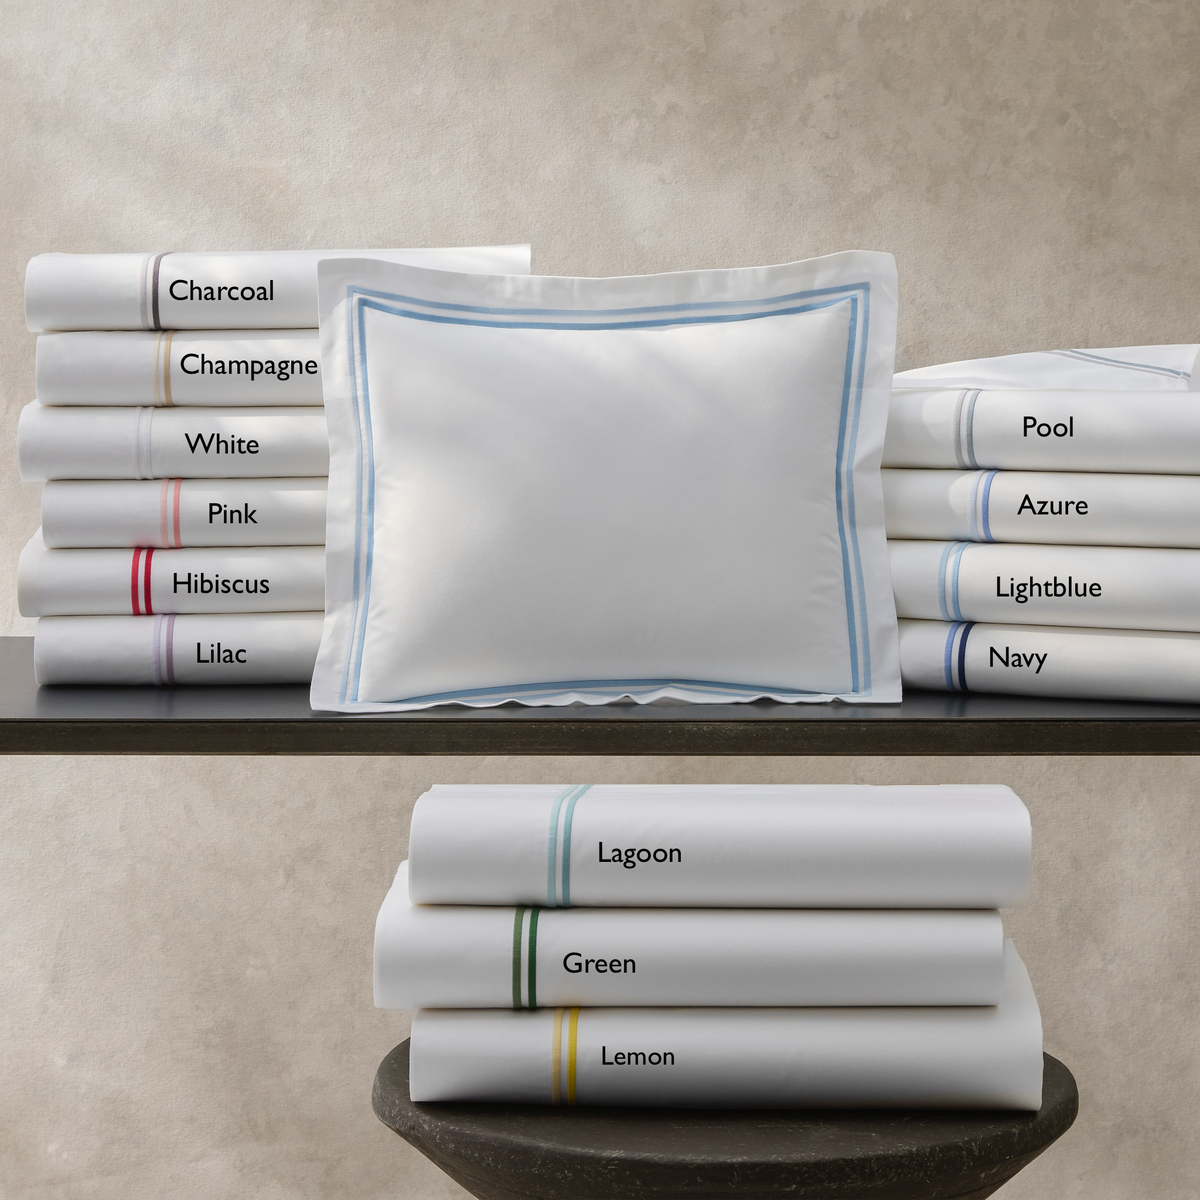 Folded Sheets of Matouk Essex Bedding with Label of All Colors